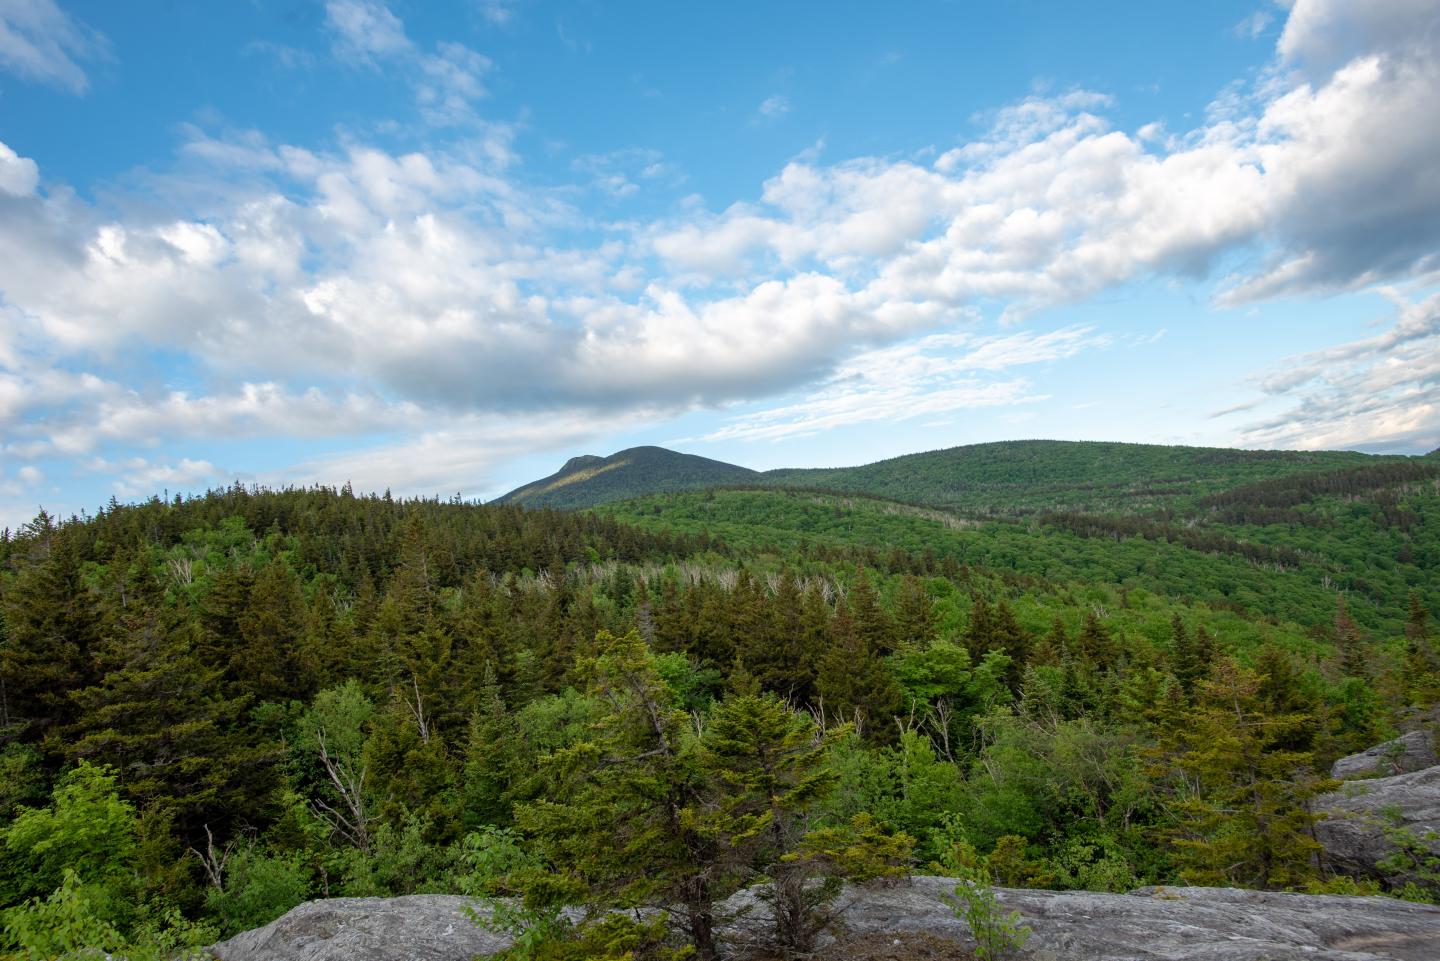 Camel's Hump Mountain in Vermont